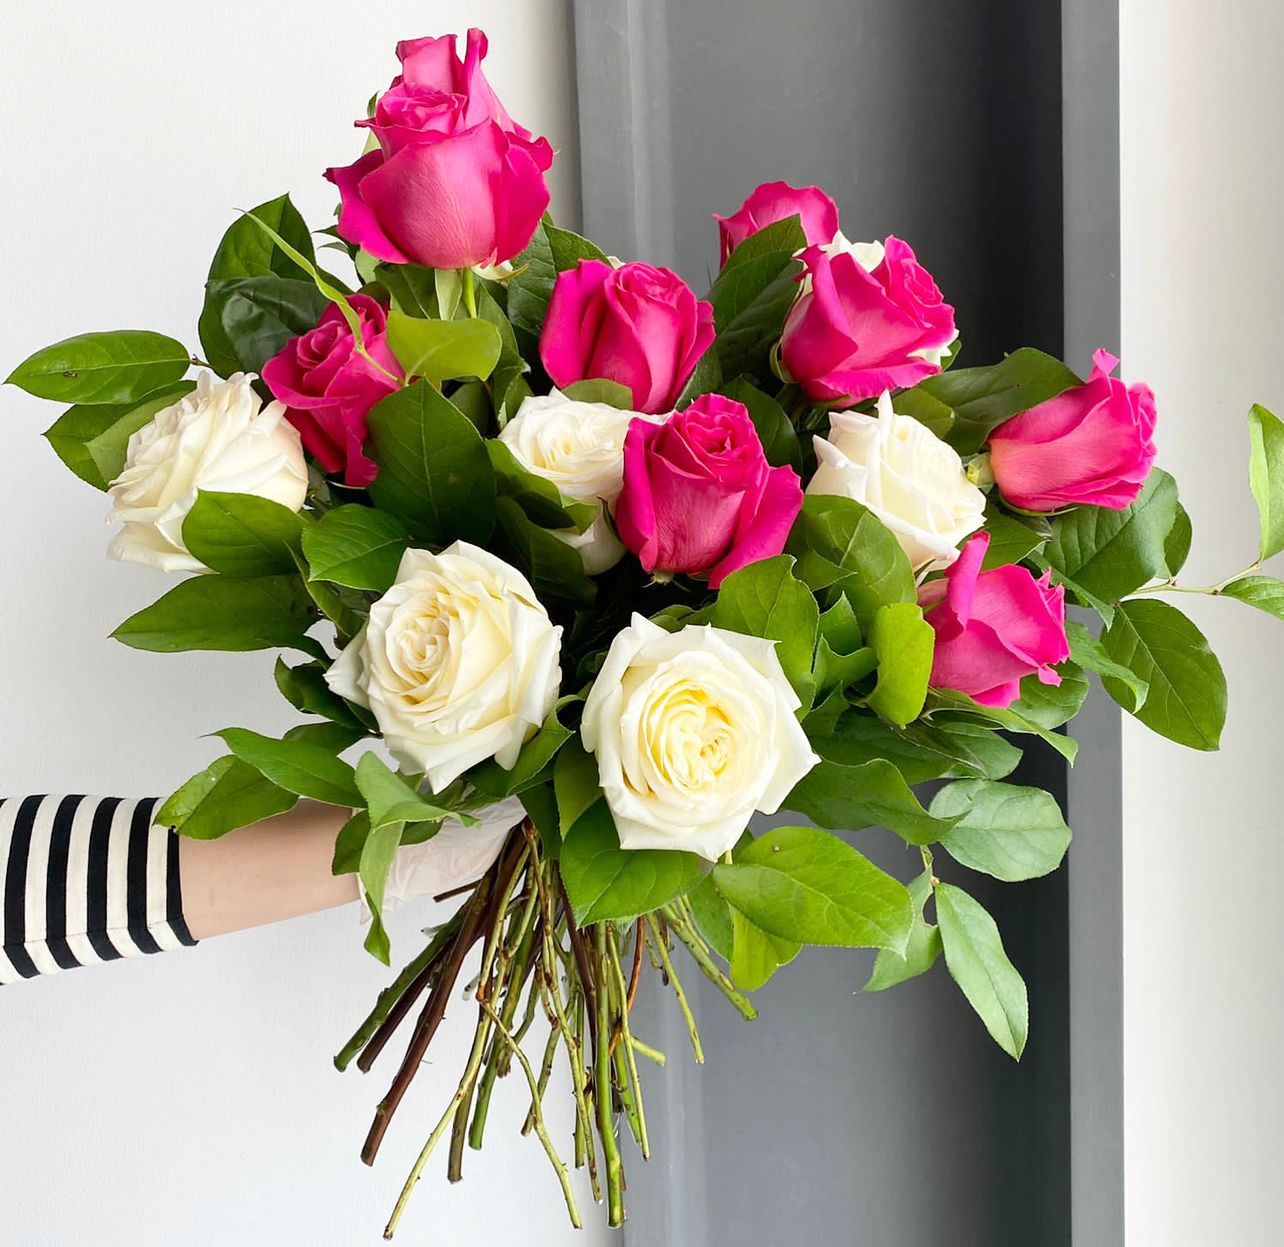 Florette BERLIN - A lovely bouquet with a mixture of white, dark pink roses, and lemon leaves. 